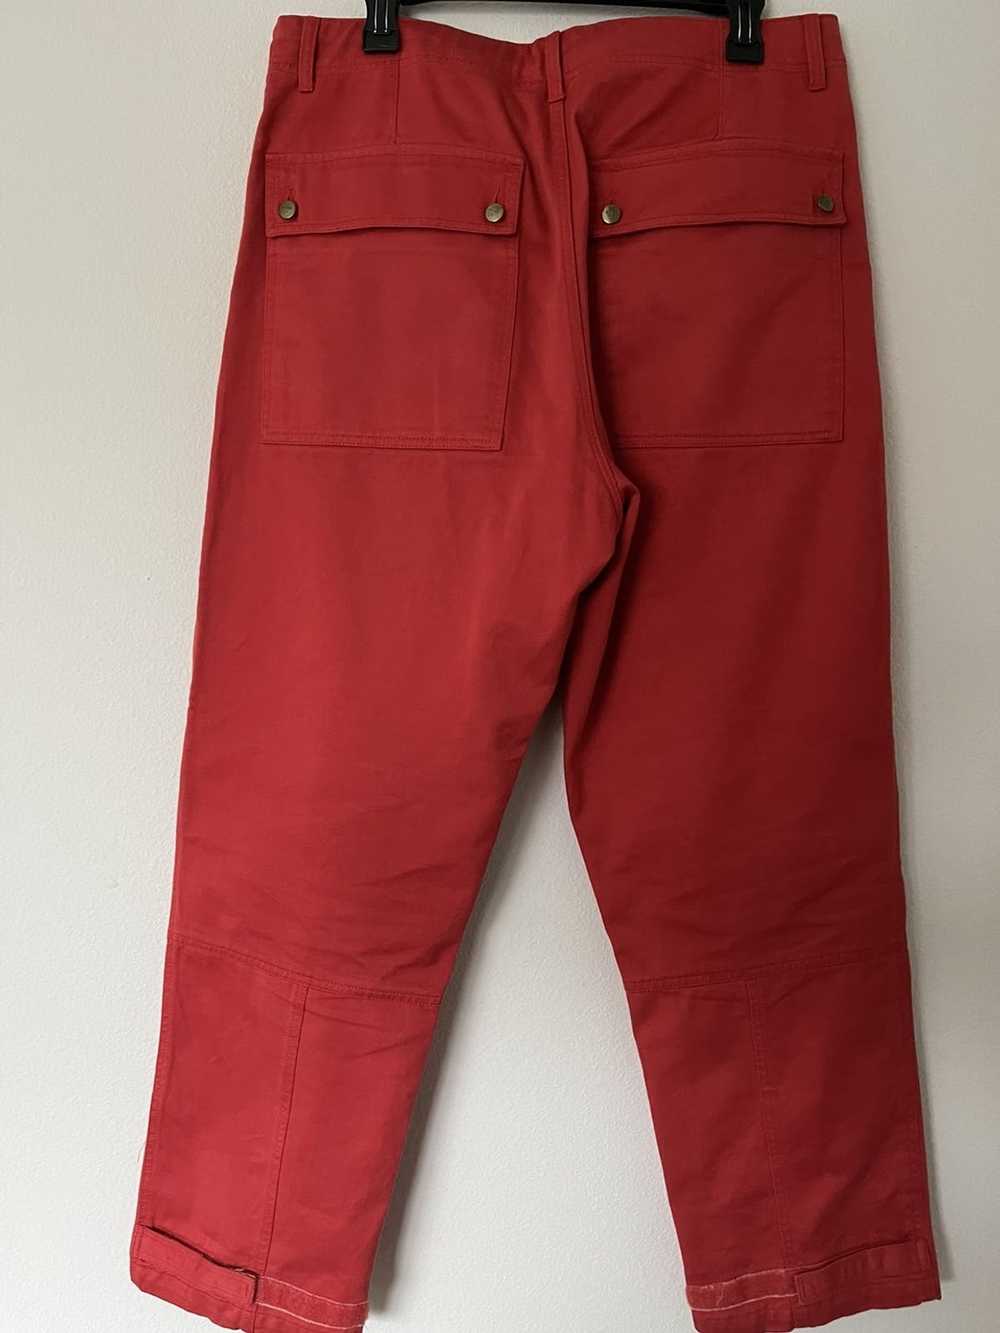 Vyner Articles Almost New, Denim Cargo Pants - image 2